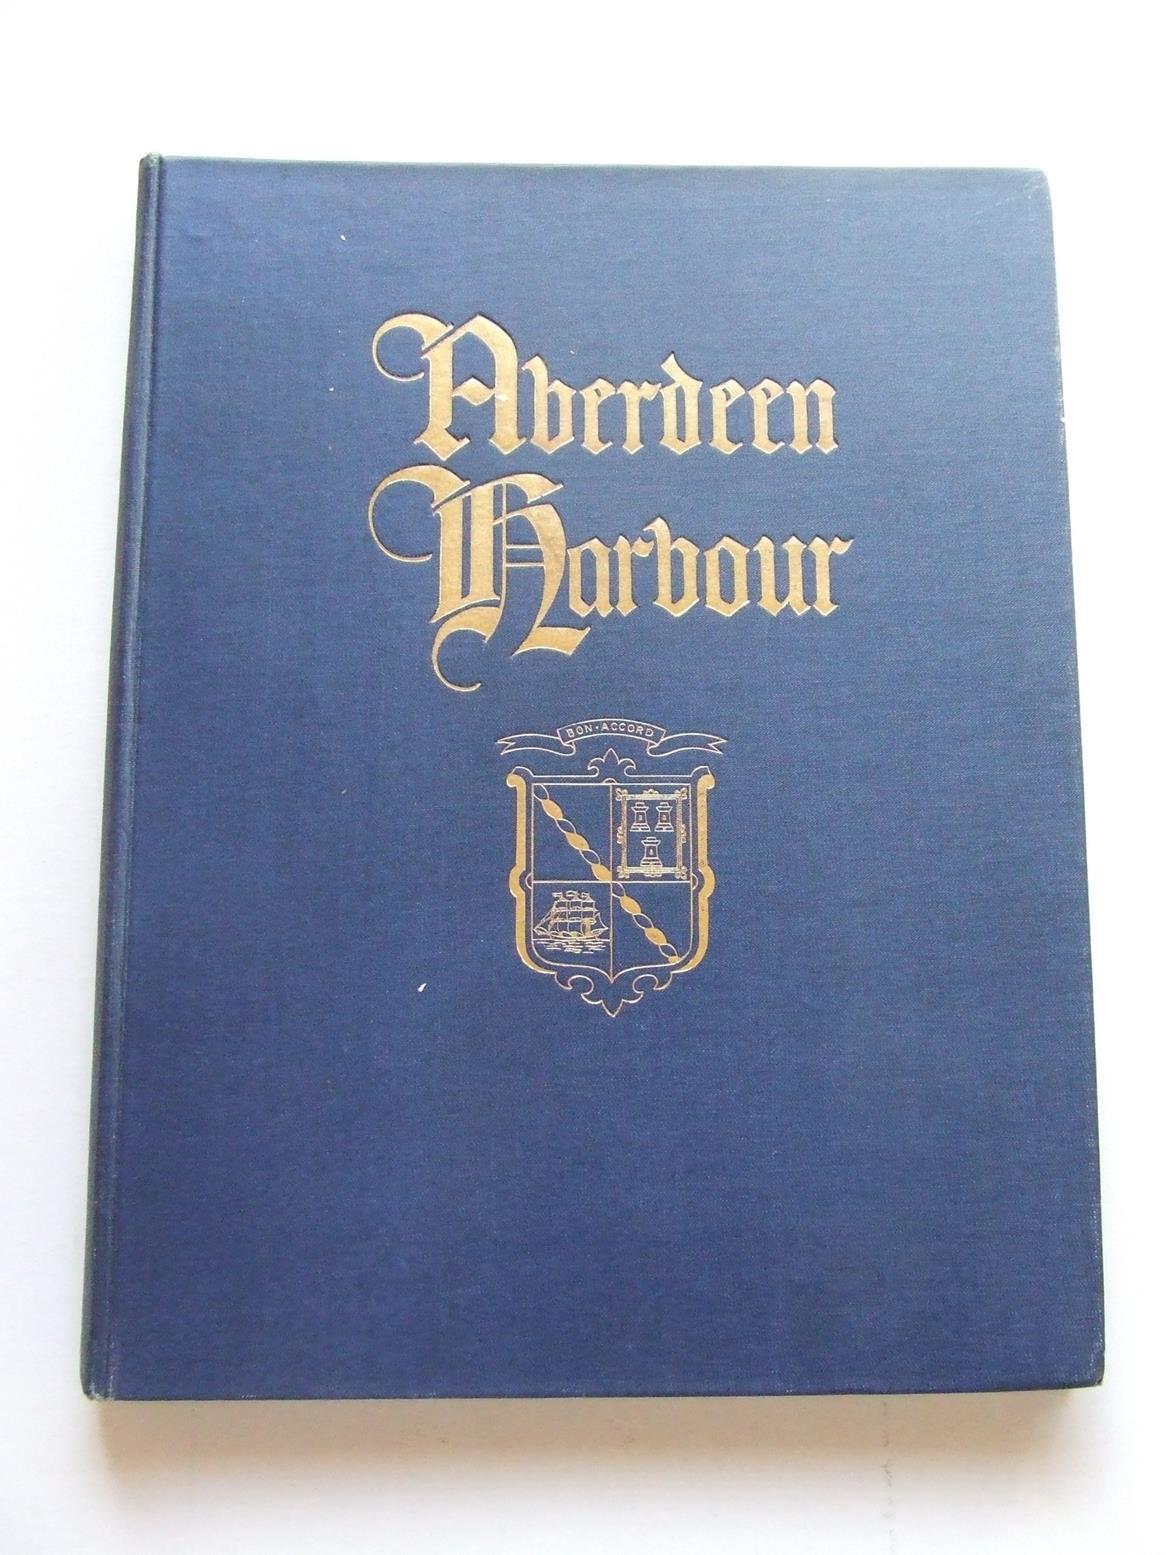 Aberdeen Harbour. published for the Harbour Commissioners